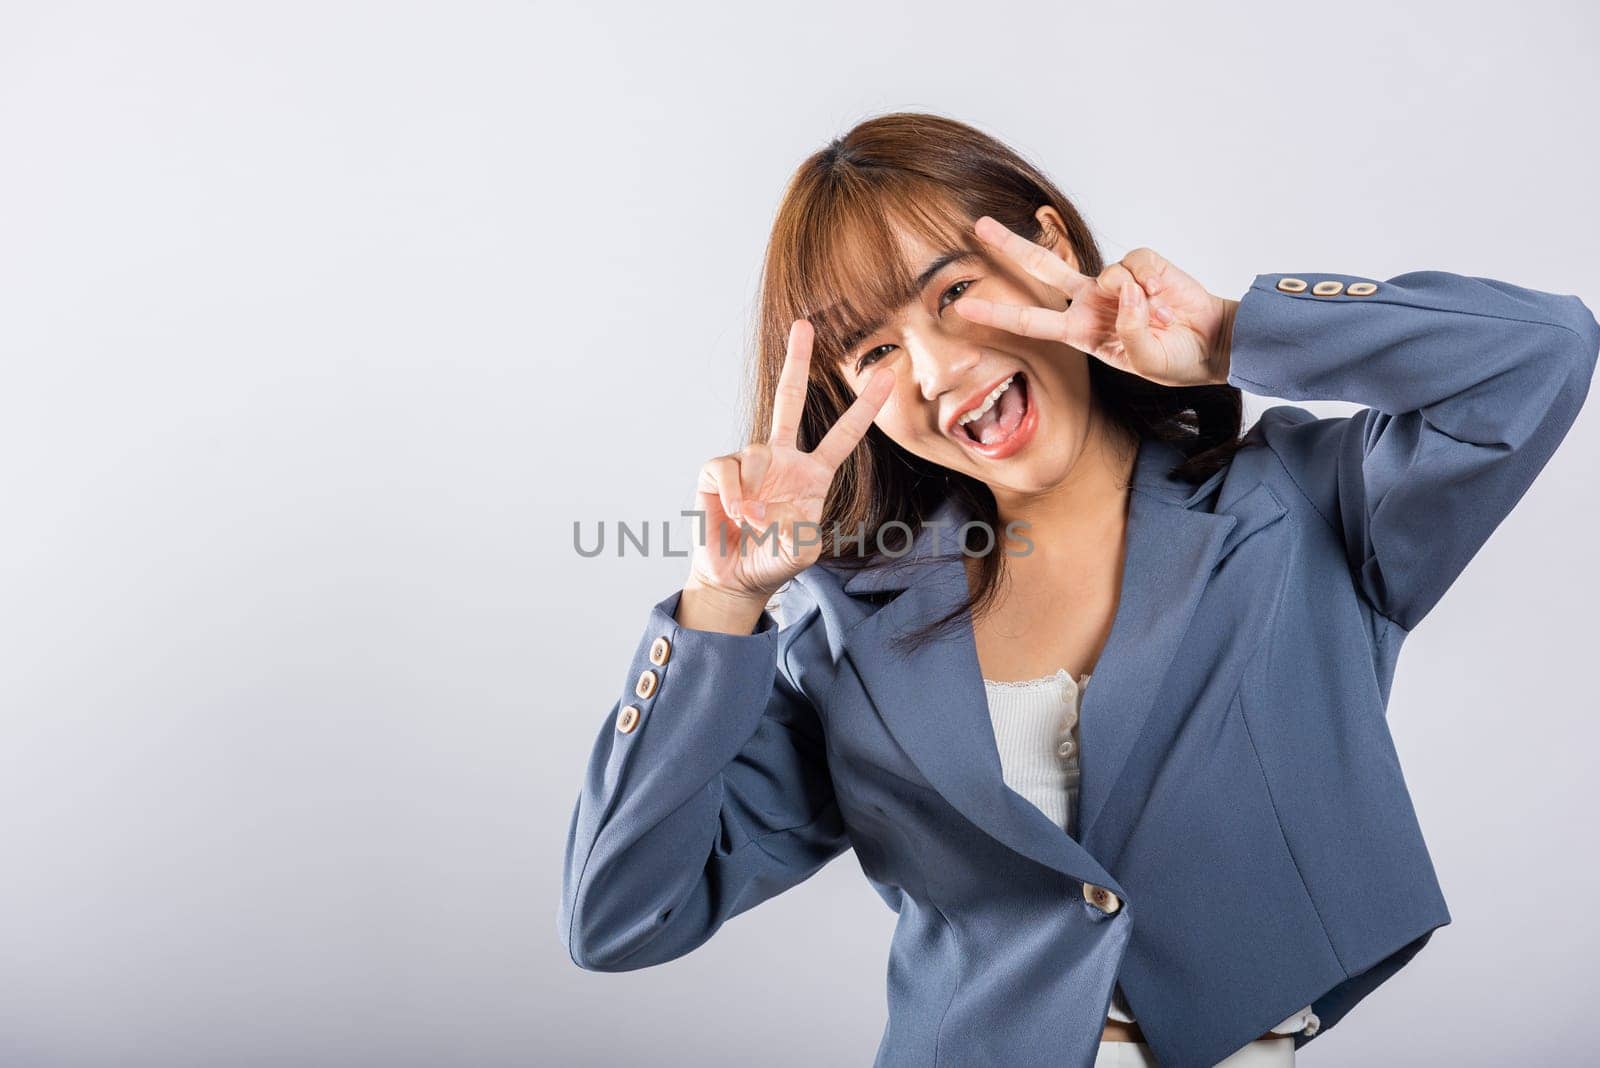 Asian woman showcases her optimism and peace by gesturing victory by Sorapop